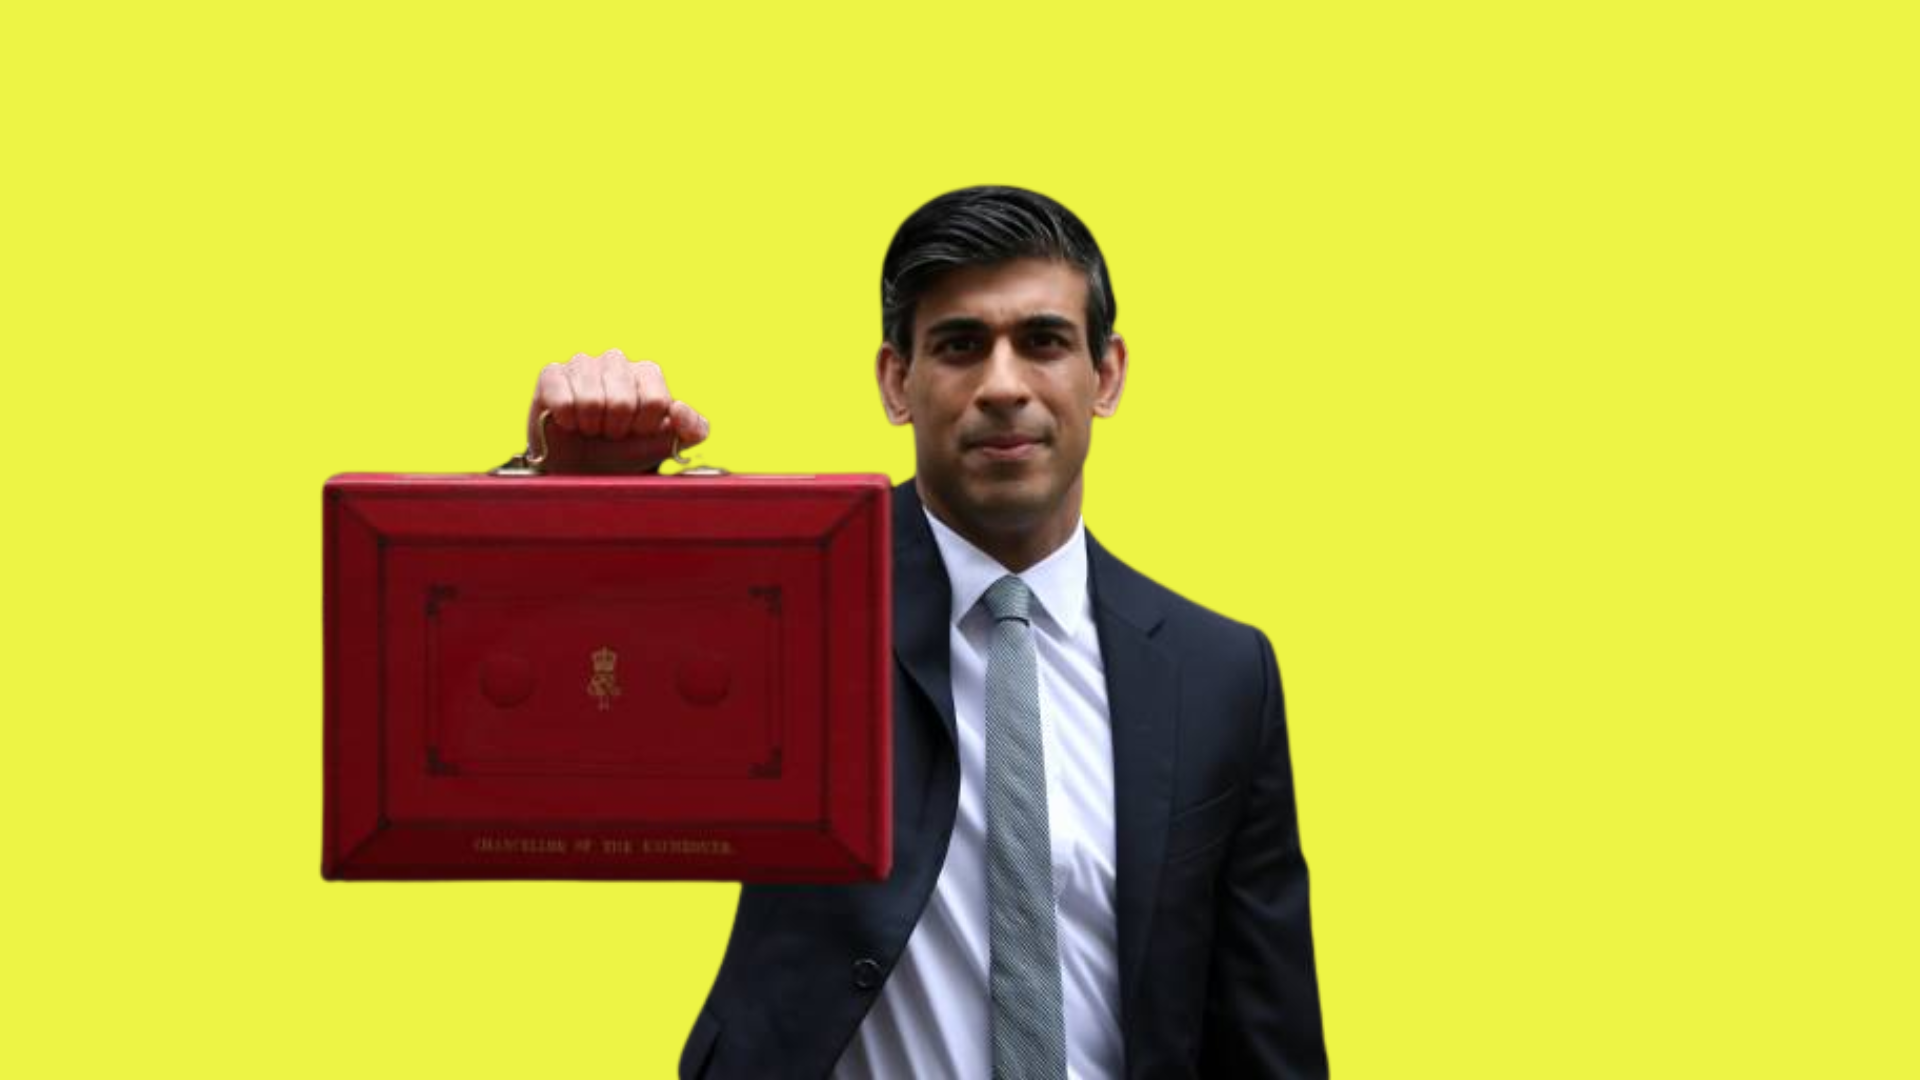 Budget 2021: What’s included for accessible transport across the UK? Image of Rishi Sunak, the Chancellor, holding the red box.